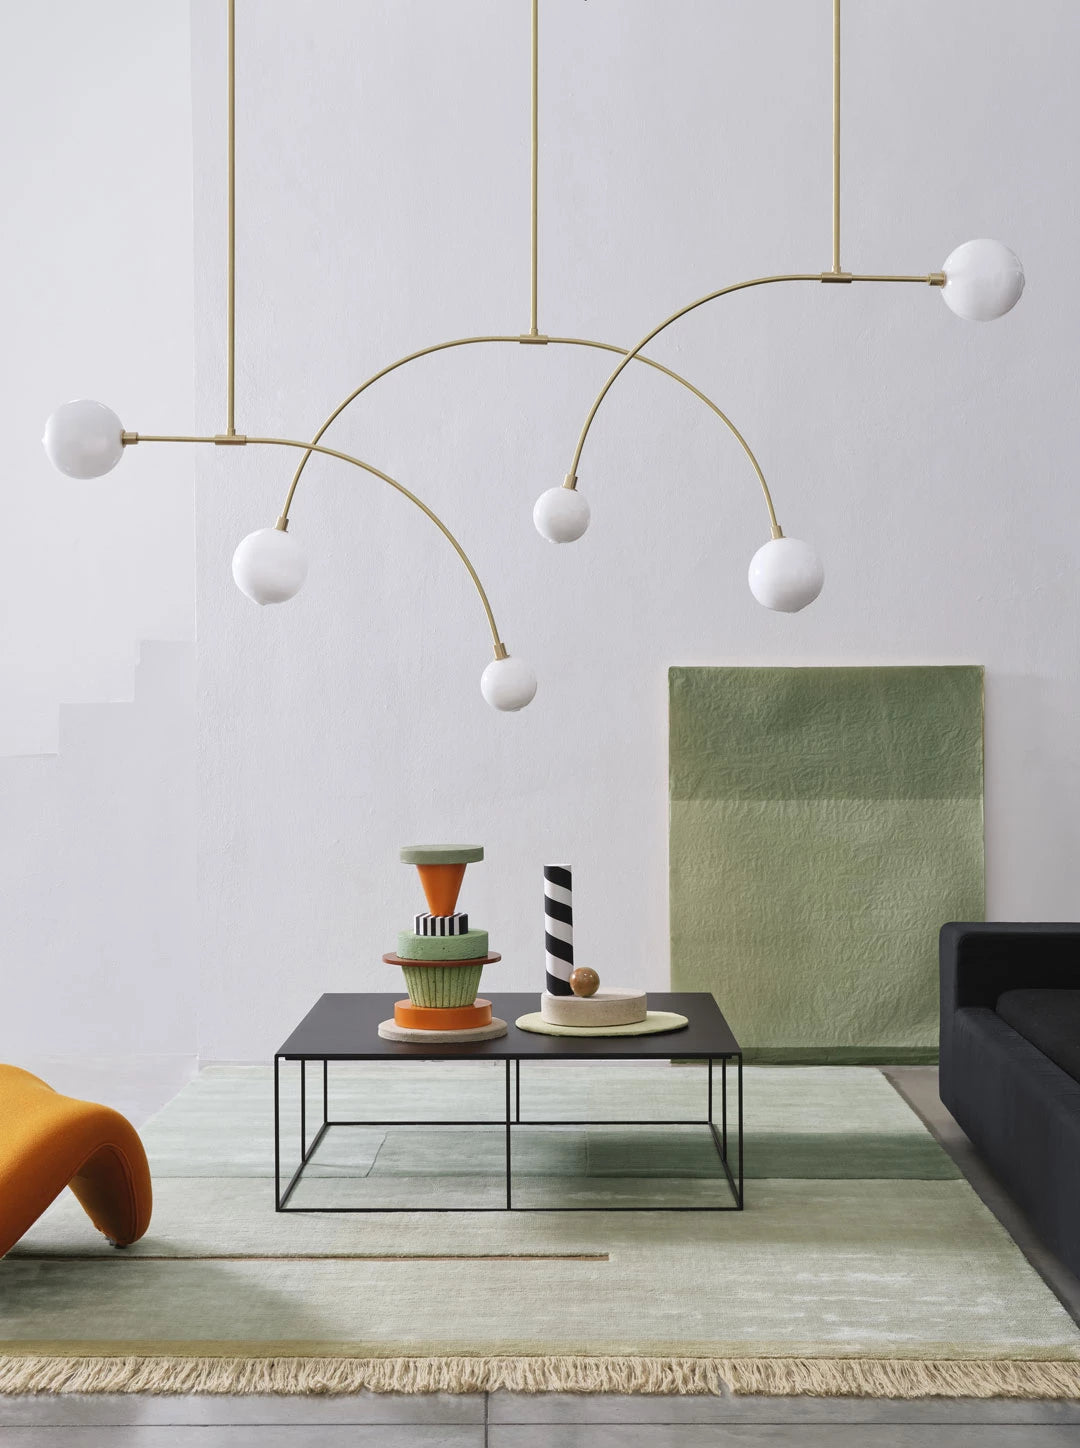 Balance 1.0 Pendent by SkLo